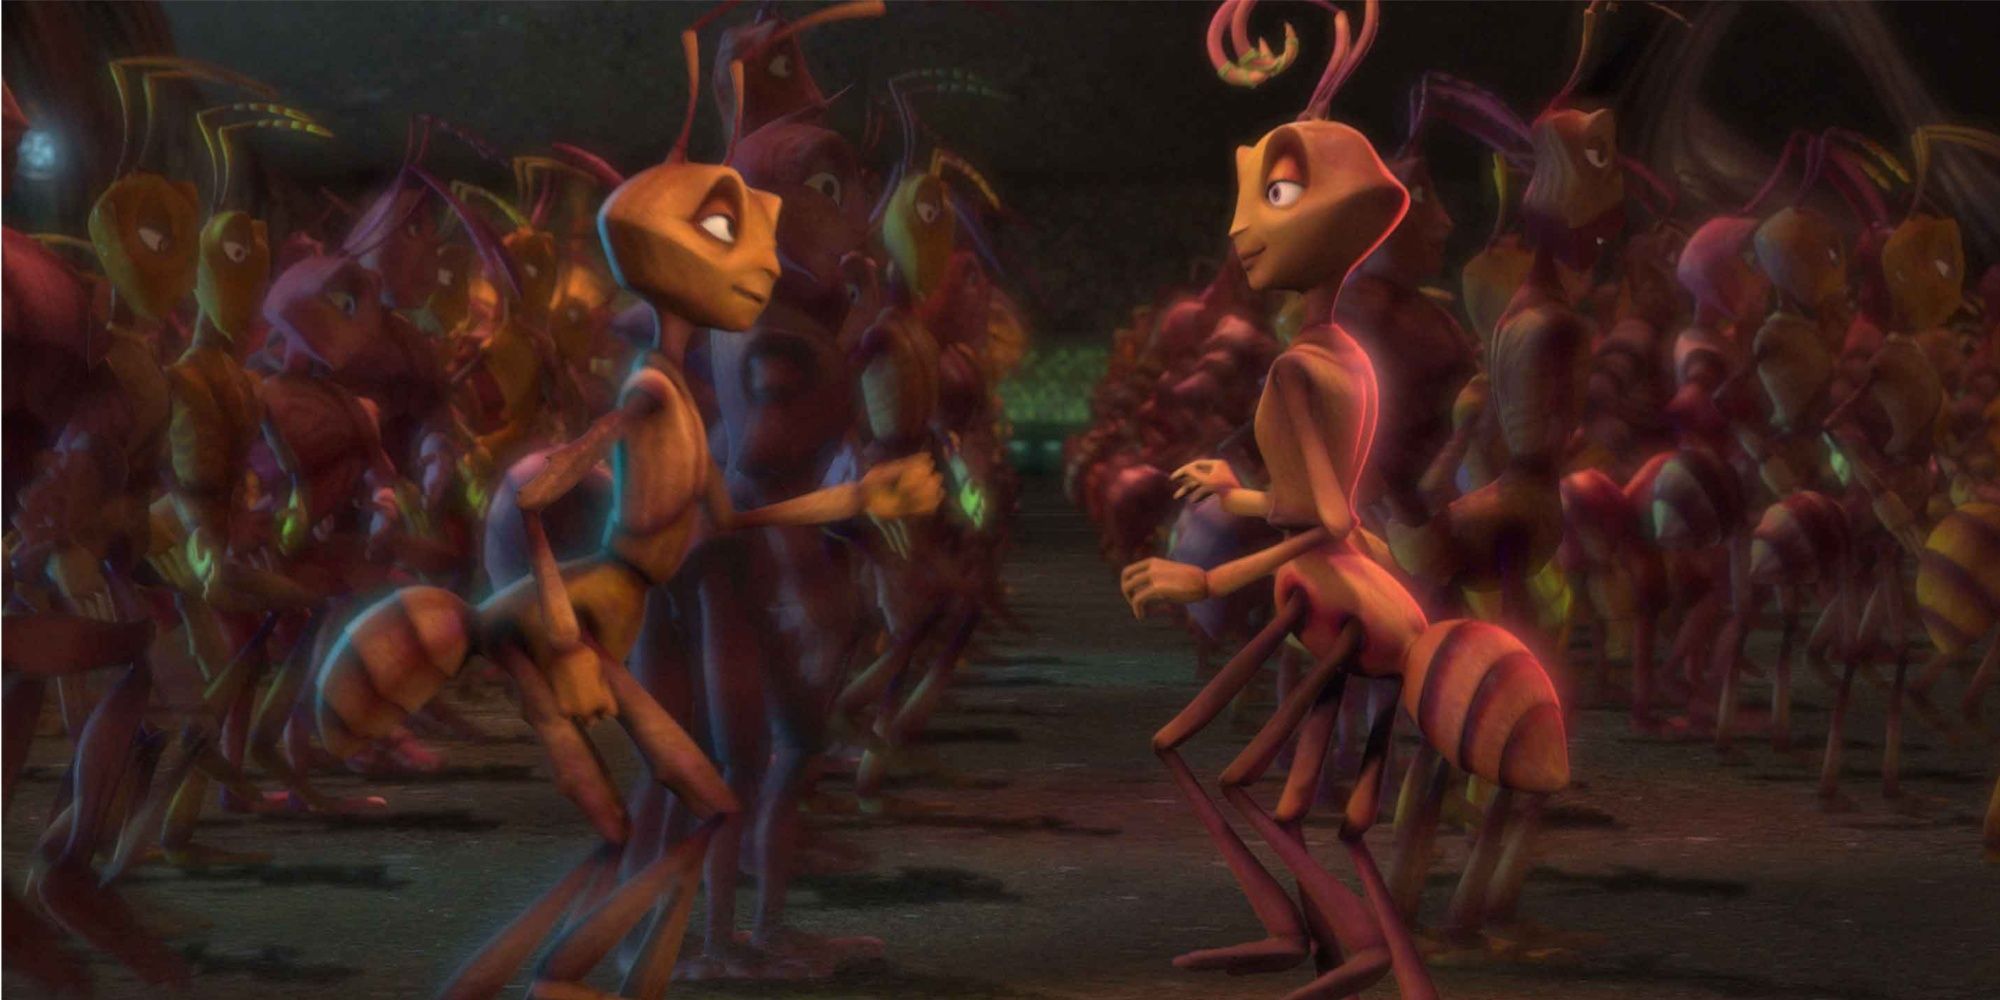 Z and Bala from Antz dancing